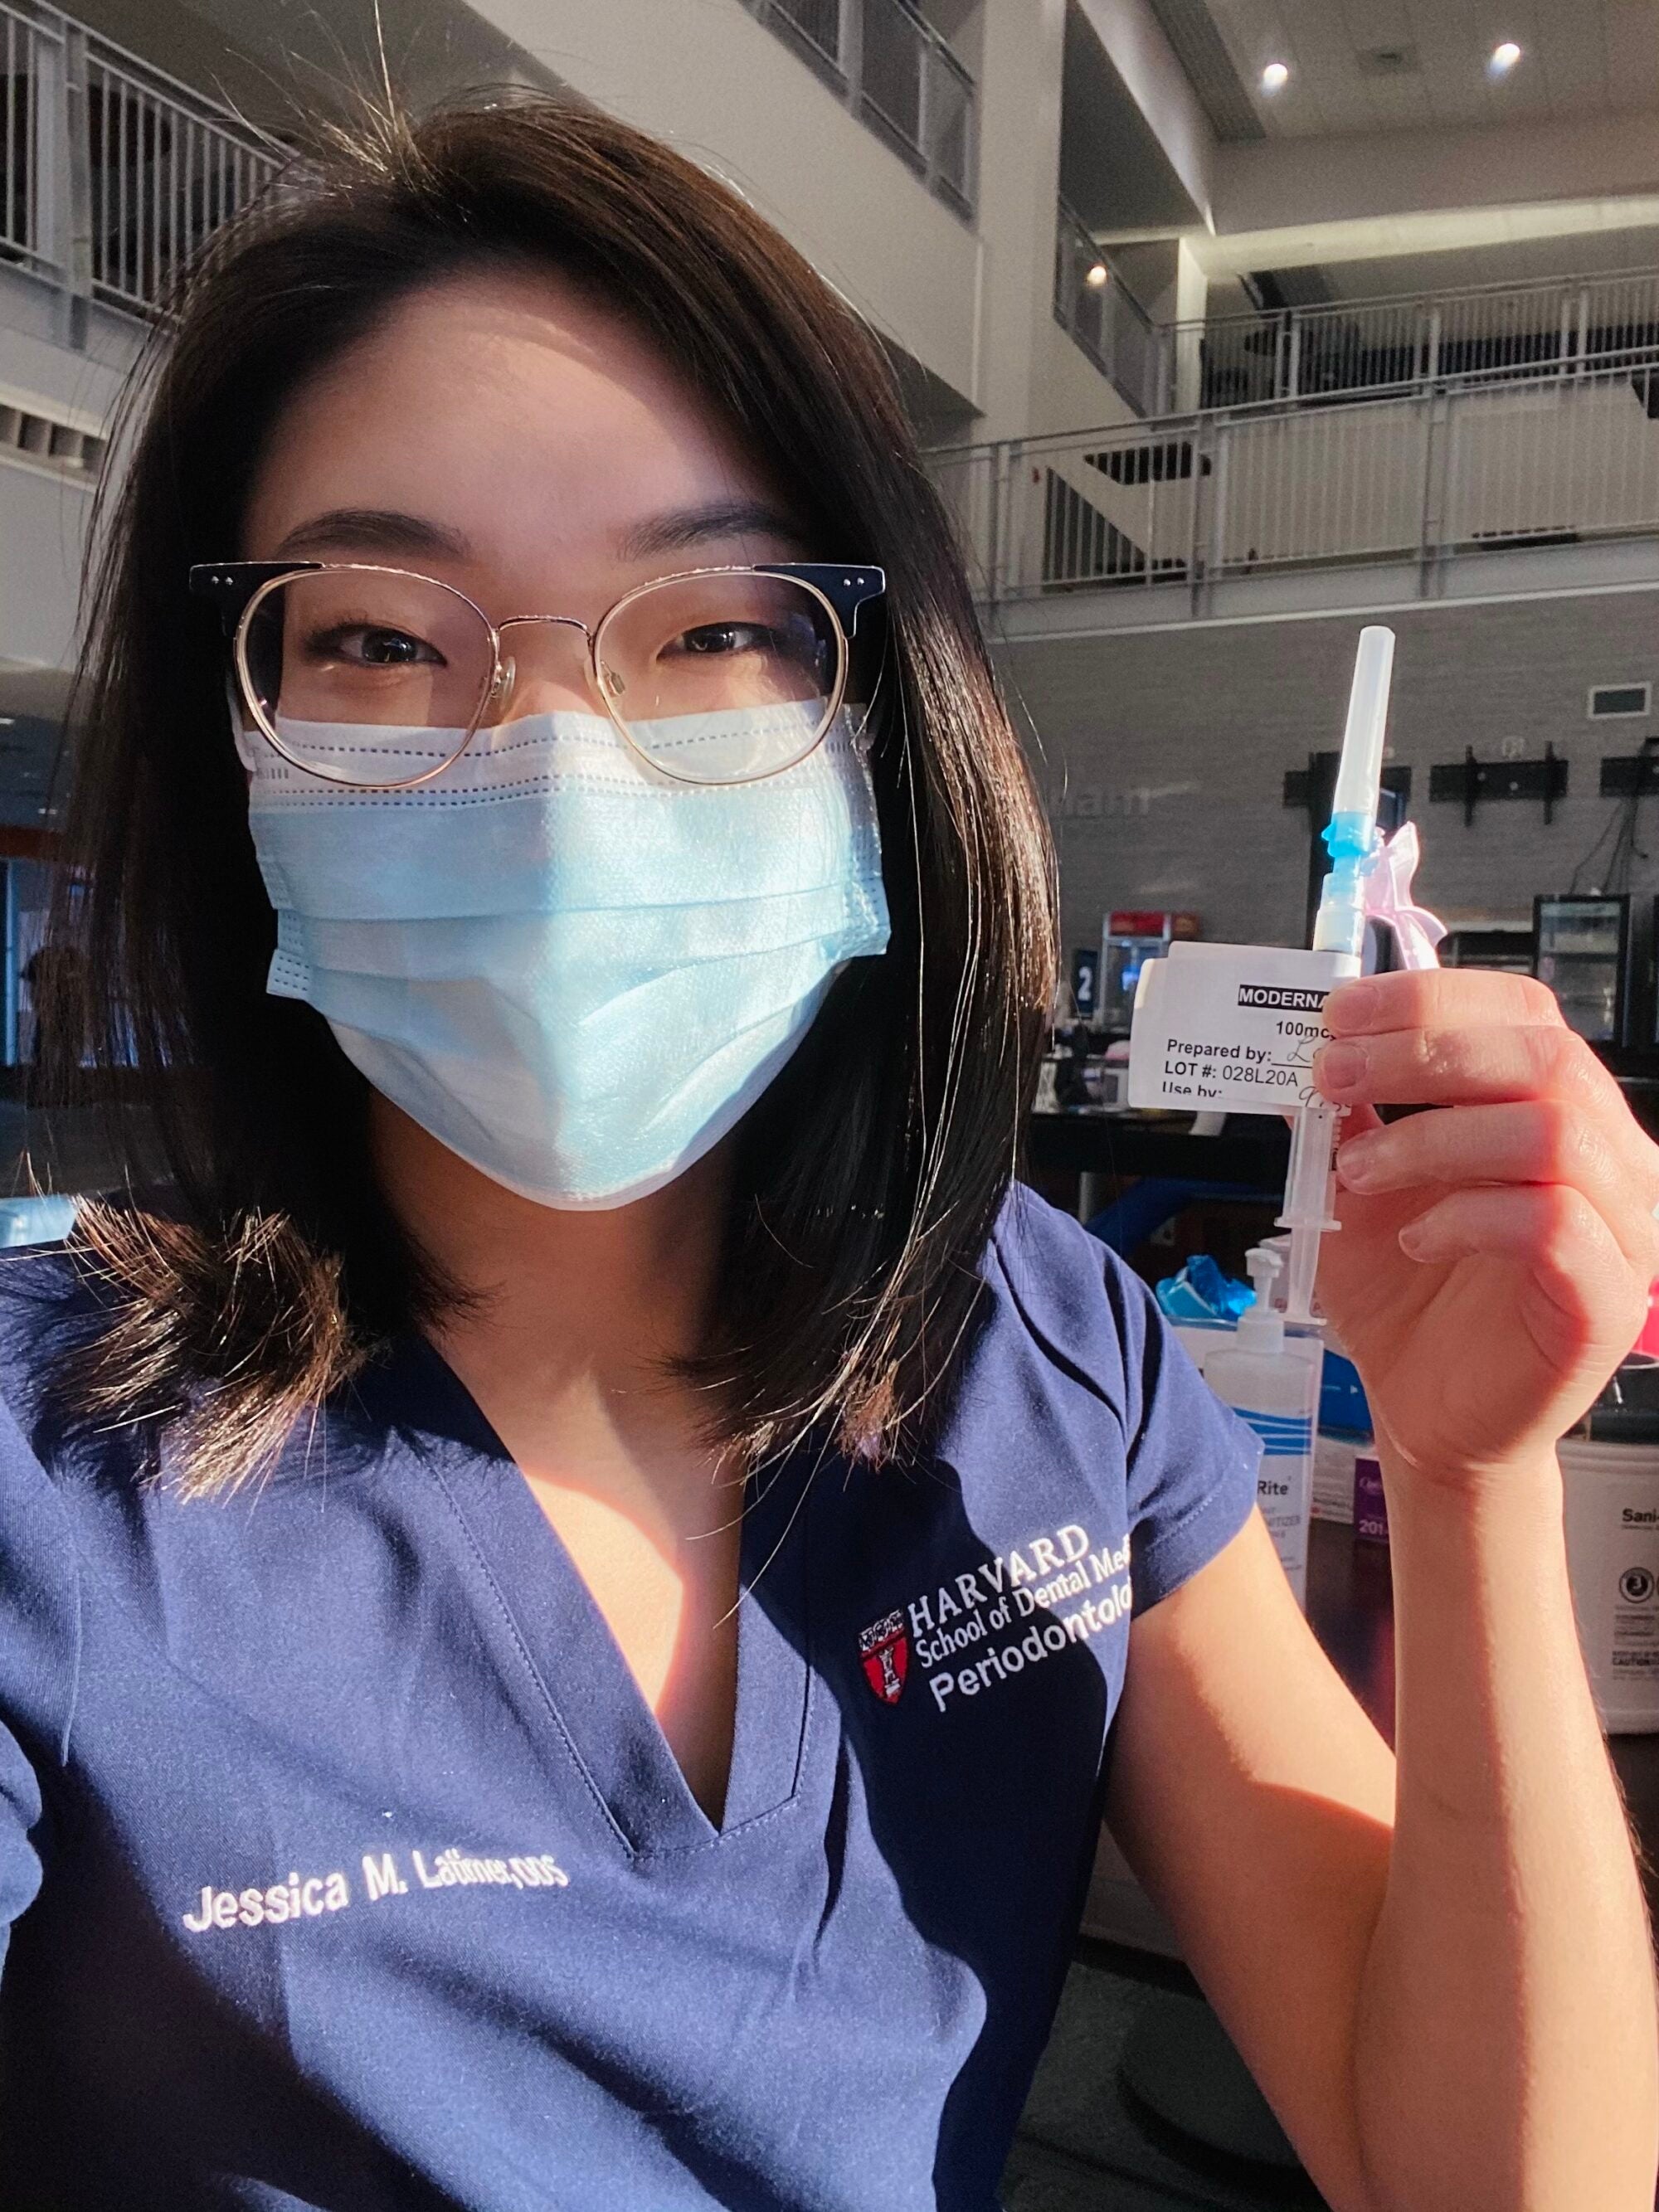 A young woman in blue scrubs holds a COVID-19 vaccine syringe